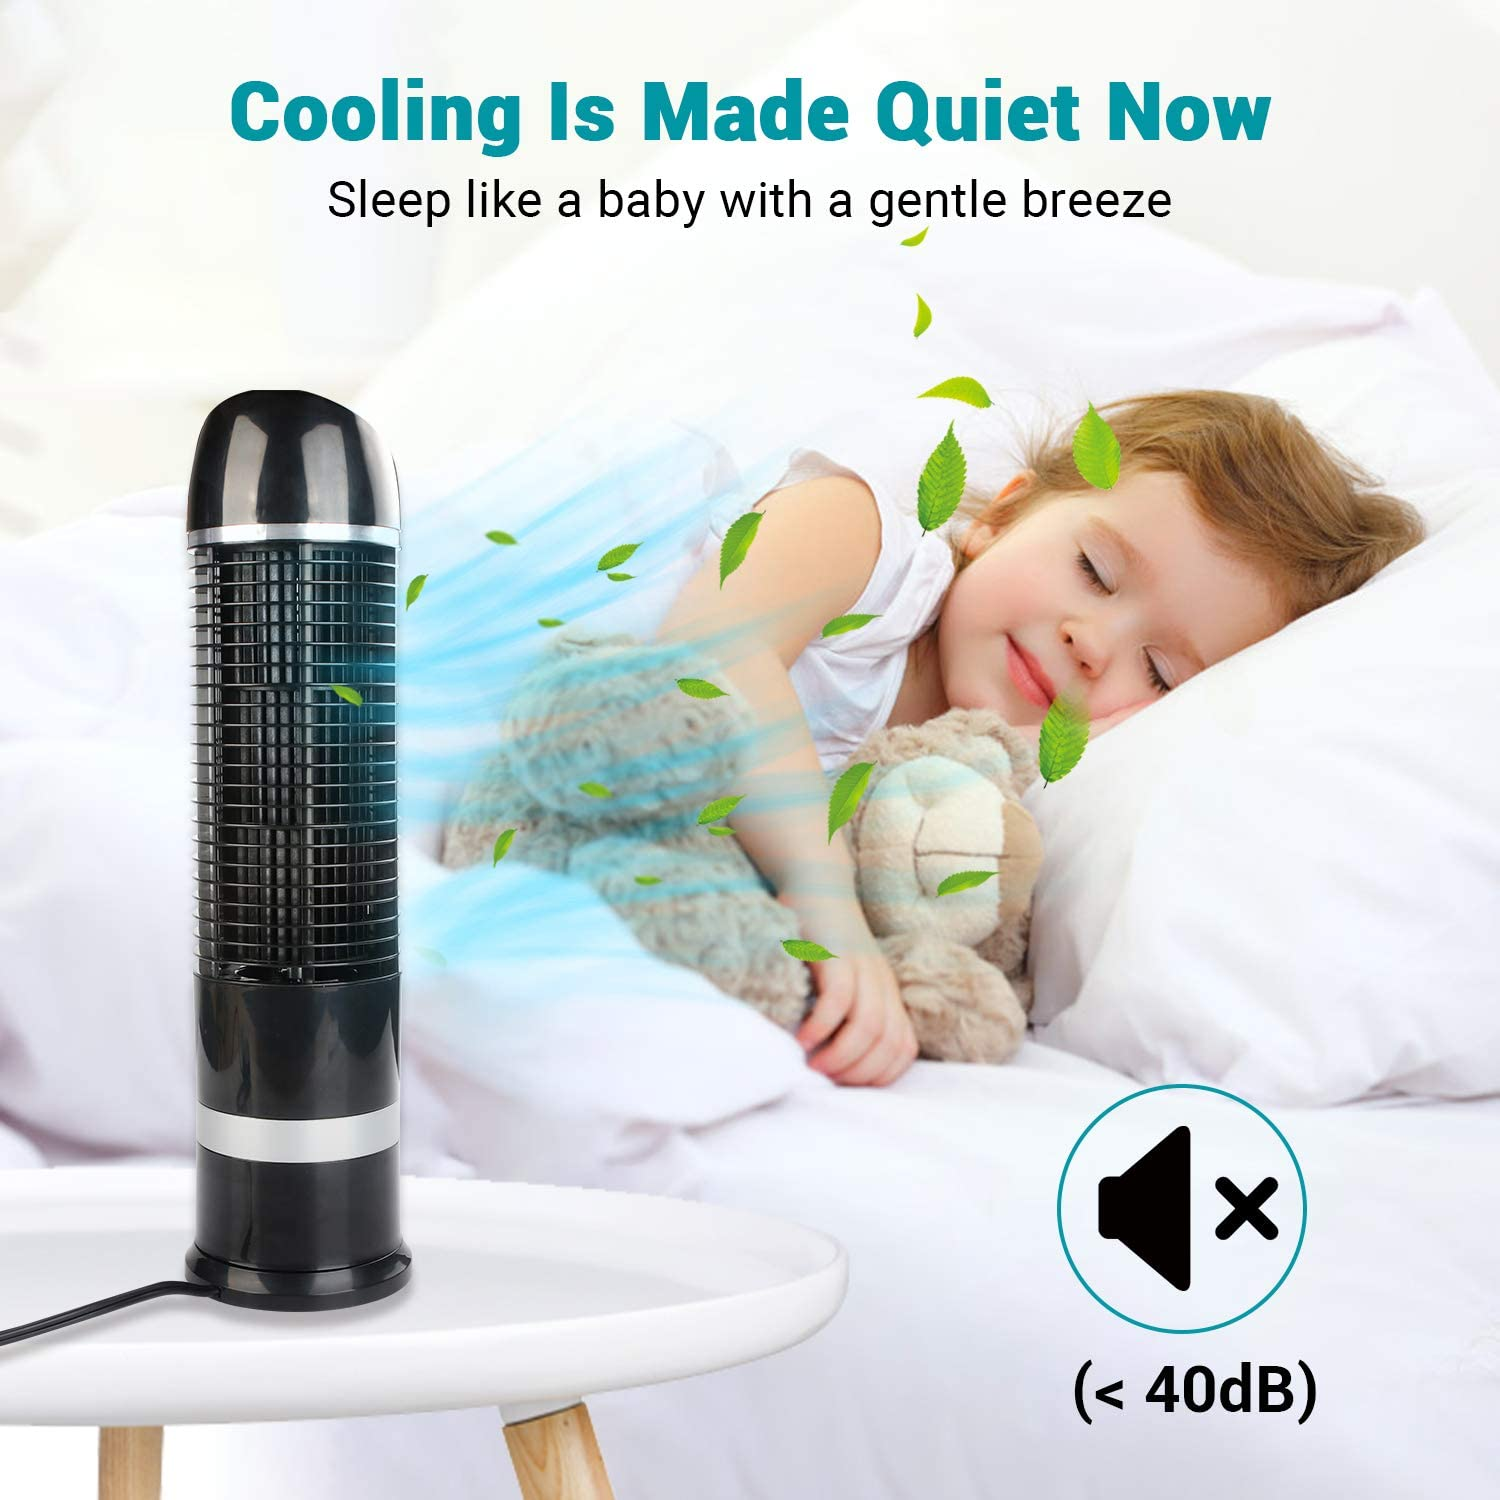 Oscillating Tower Fan, Desk Table Fan with 3 Speeds, Quiet Cooling, 60° Oscillation, 16 Inch Personal Small Bladeless Fan Cooling Fan for Bedroom Home Office Desktop